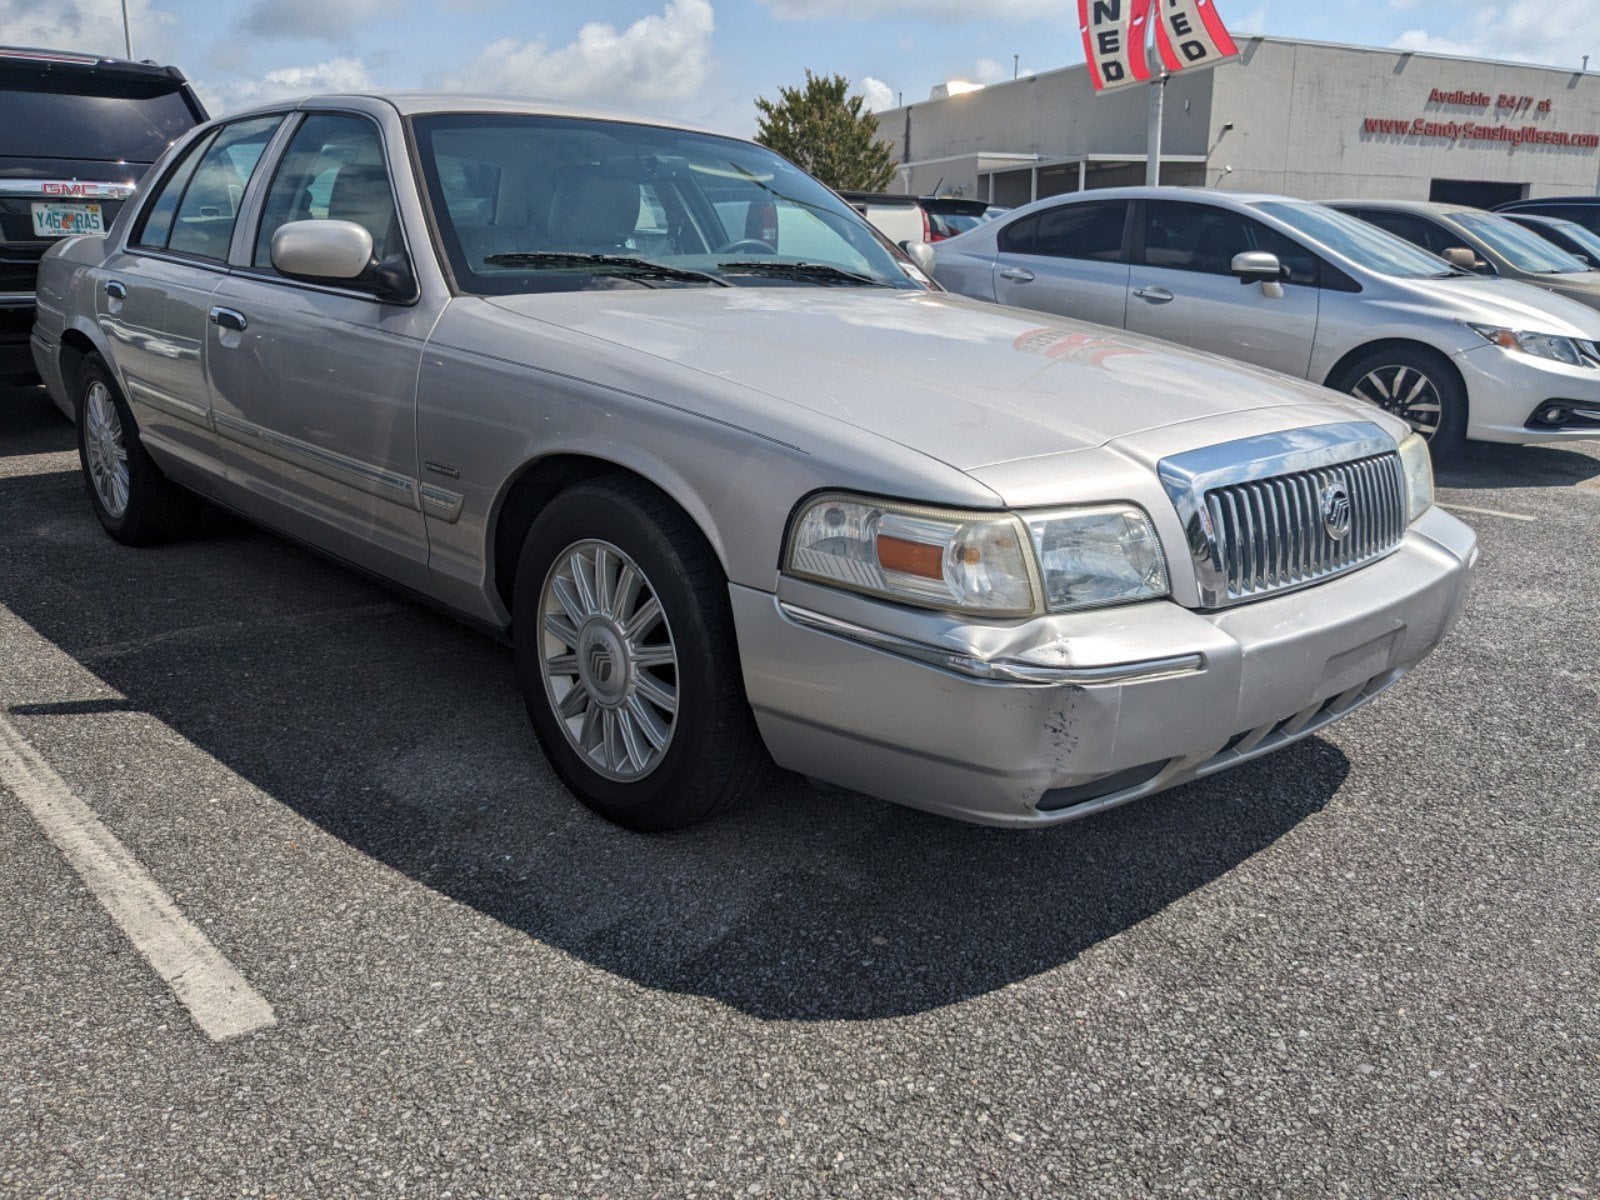 Used 2011 Mercury Grand Marquis LS with VIN 2MEBM7FV0BX608760 for sale in Daphne, AL